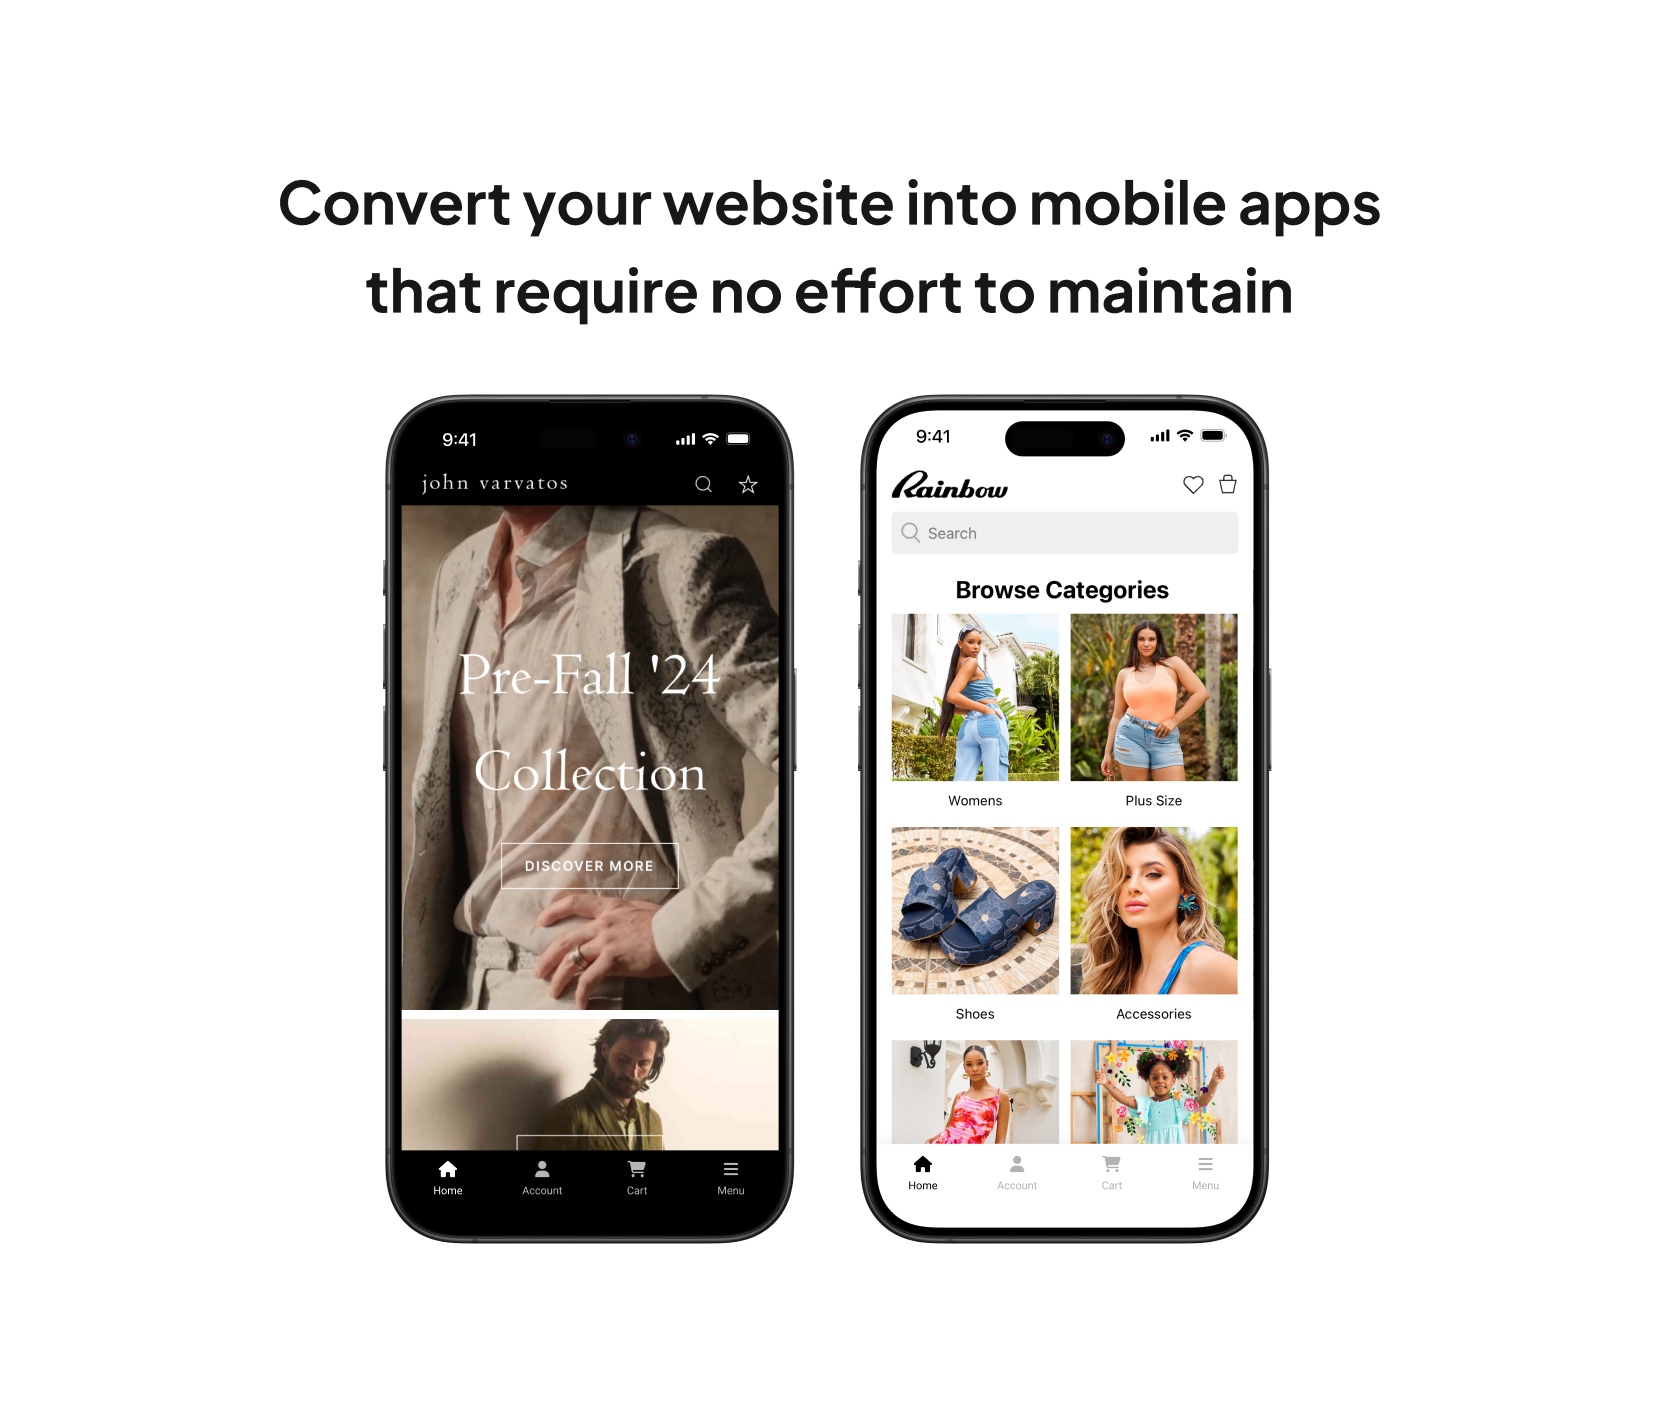 <strong>Turn your site into an app</strong> - Transform your website into a mobile app experience your users are familiar with.